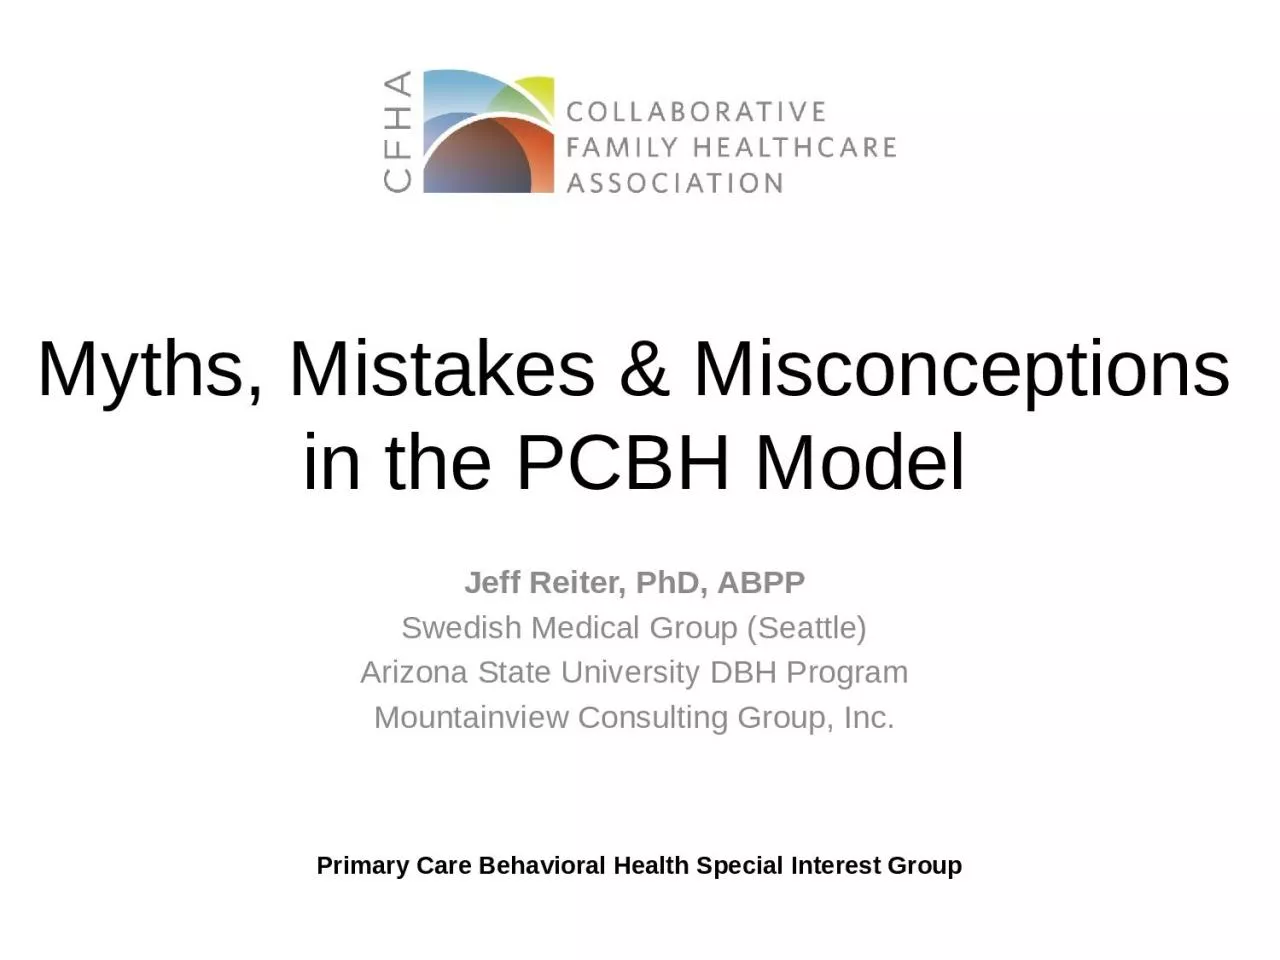 Myths, Mistakes & Misconceptions in the PCBH Model